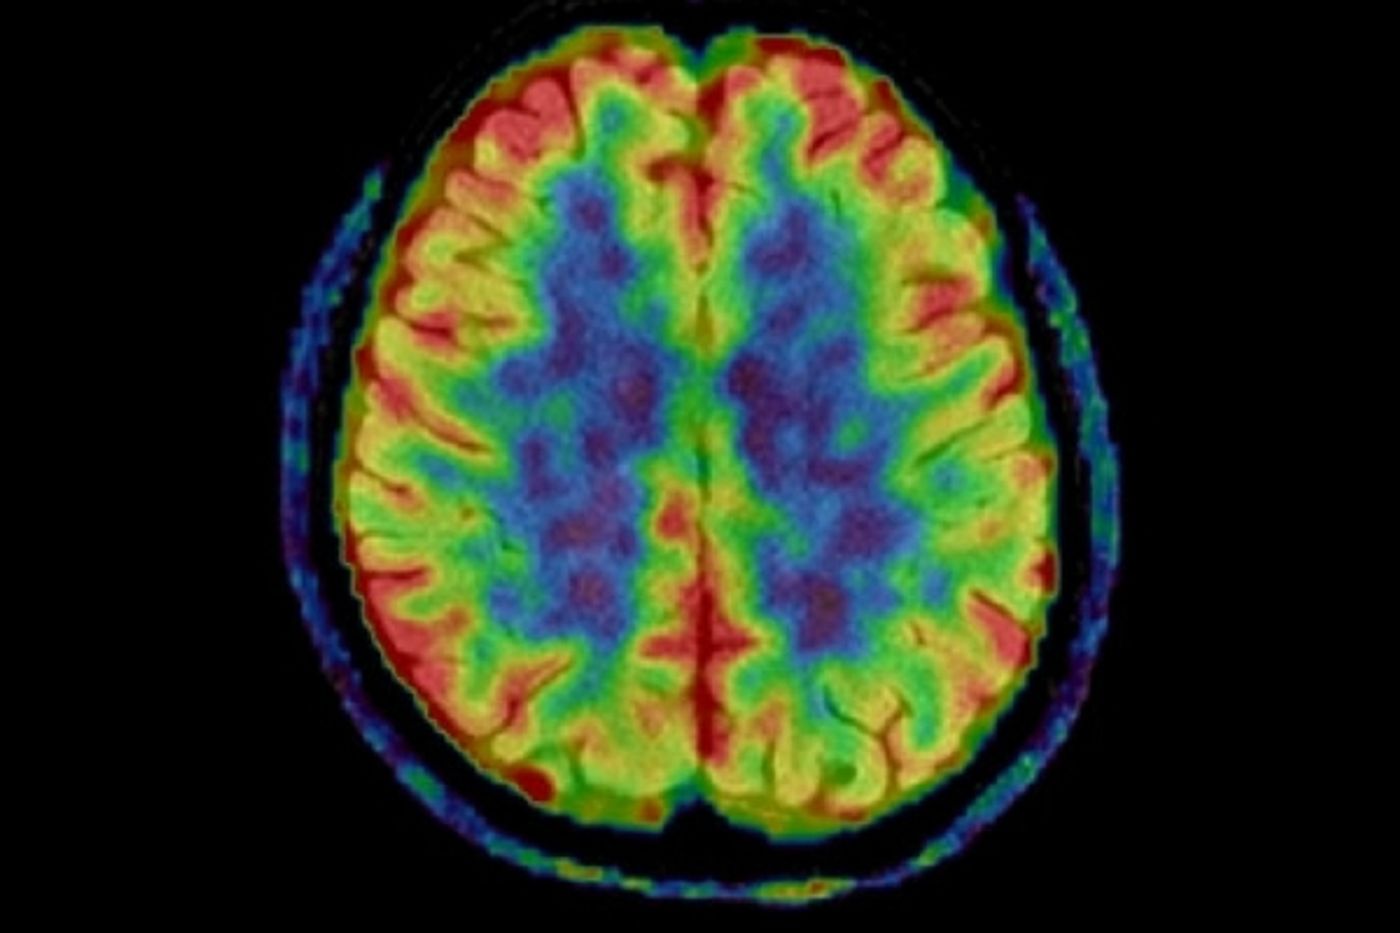 An imaging agent reveals CTE patterns in the brain